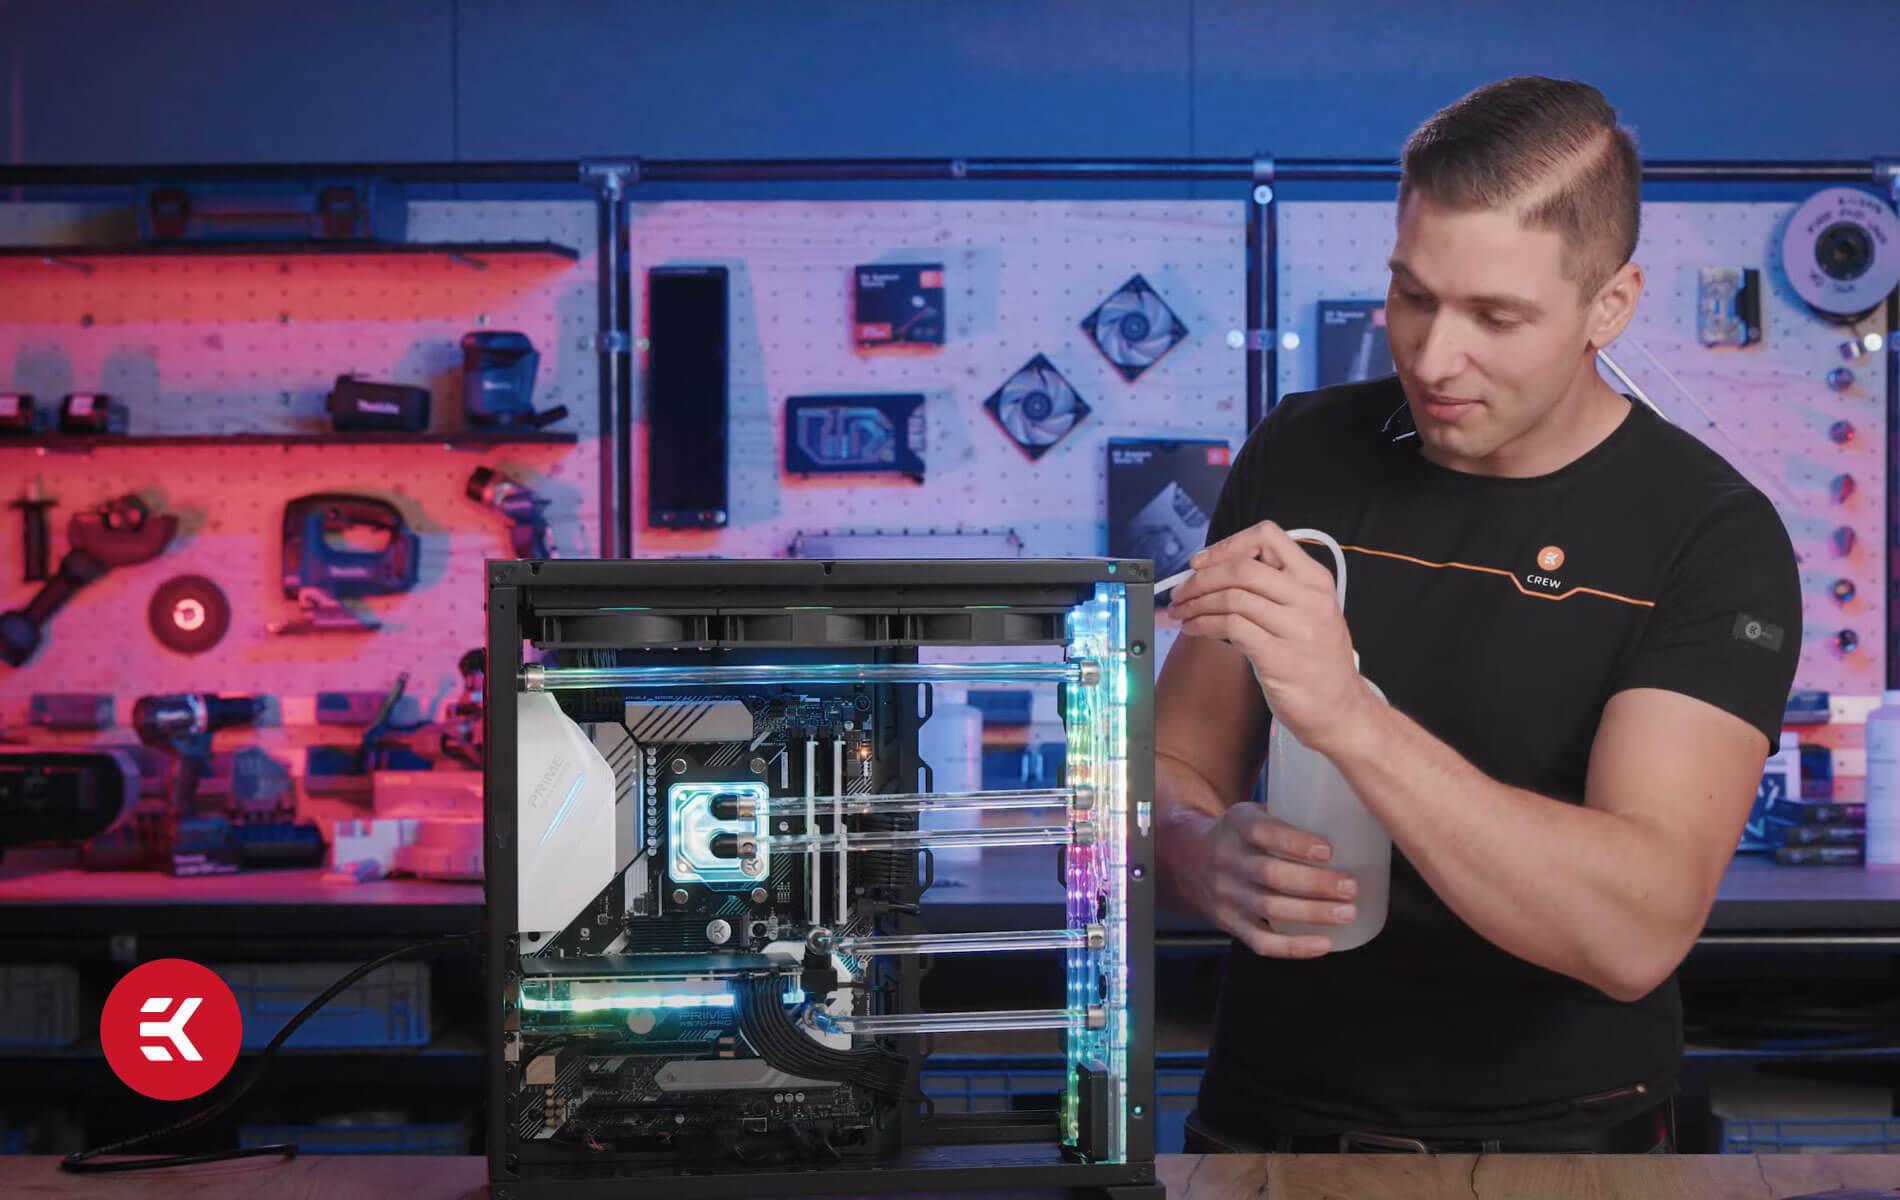 How To Maintain a Liquid Cooled PC